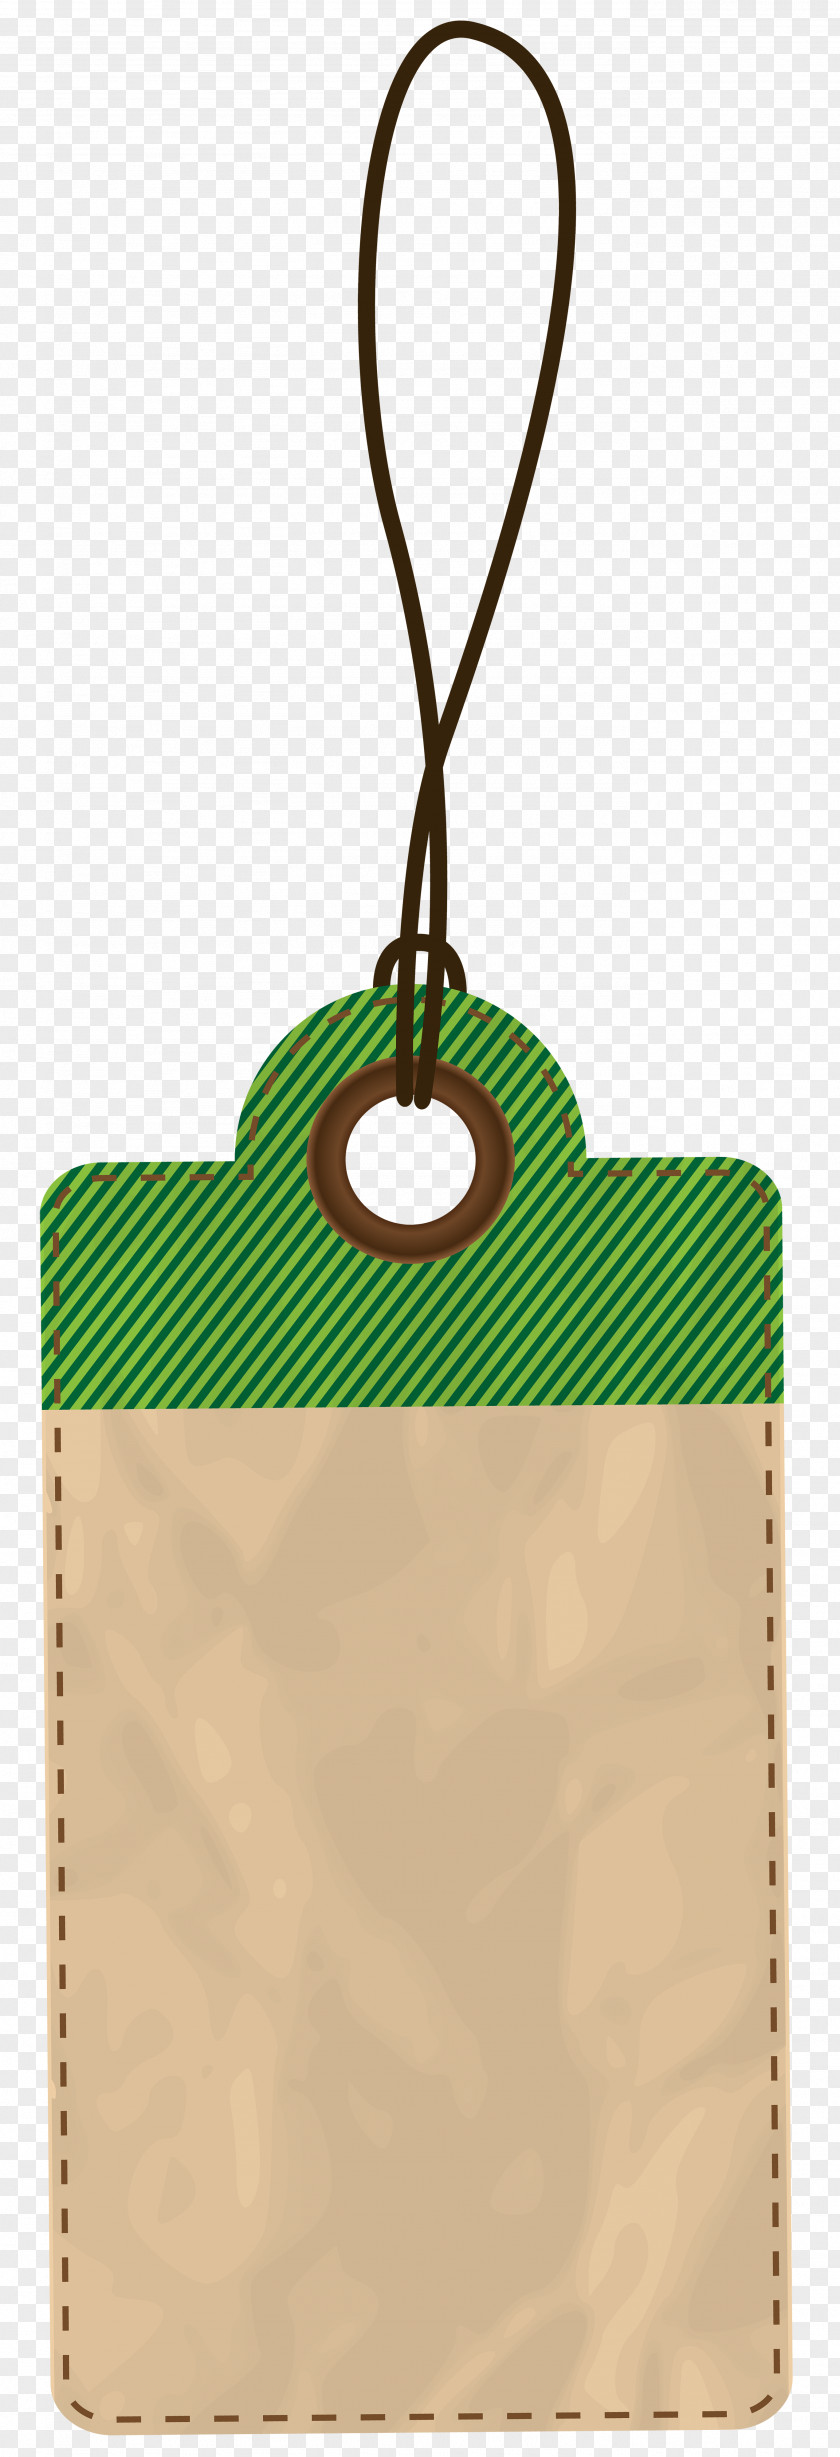 Empty Price Tag Clip Art PNG